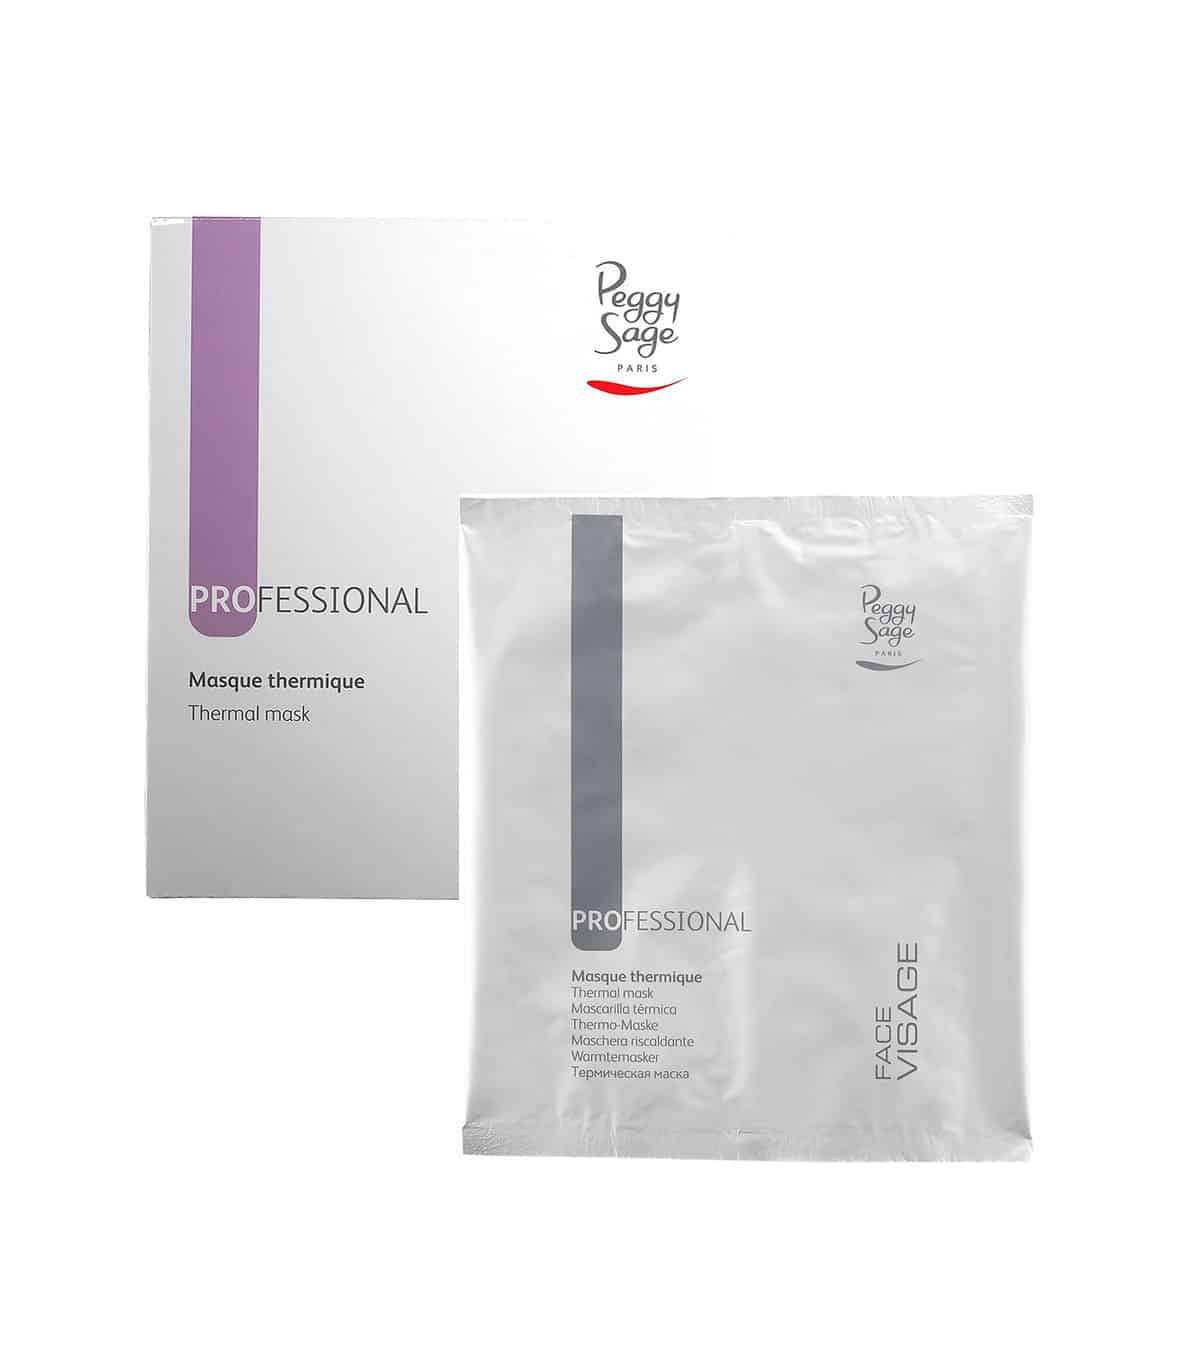 Peggy sage thermal mask 6x250g